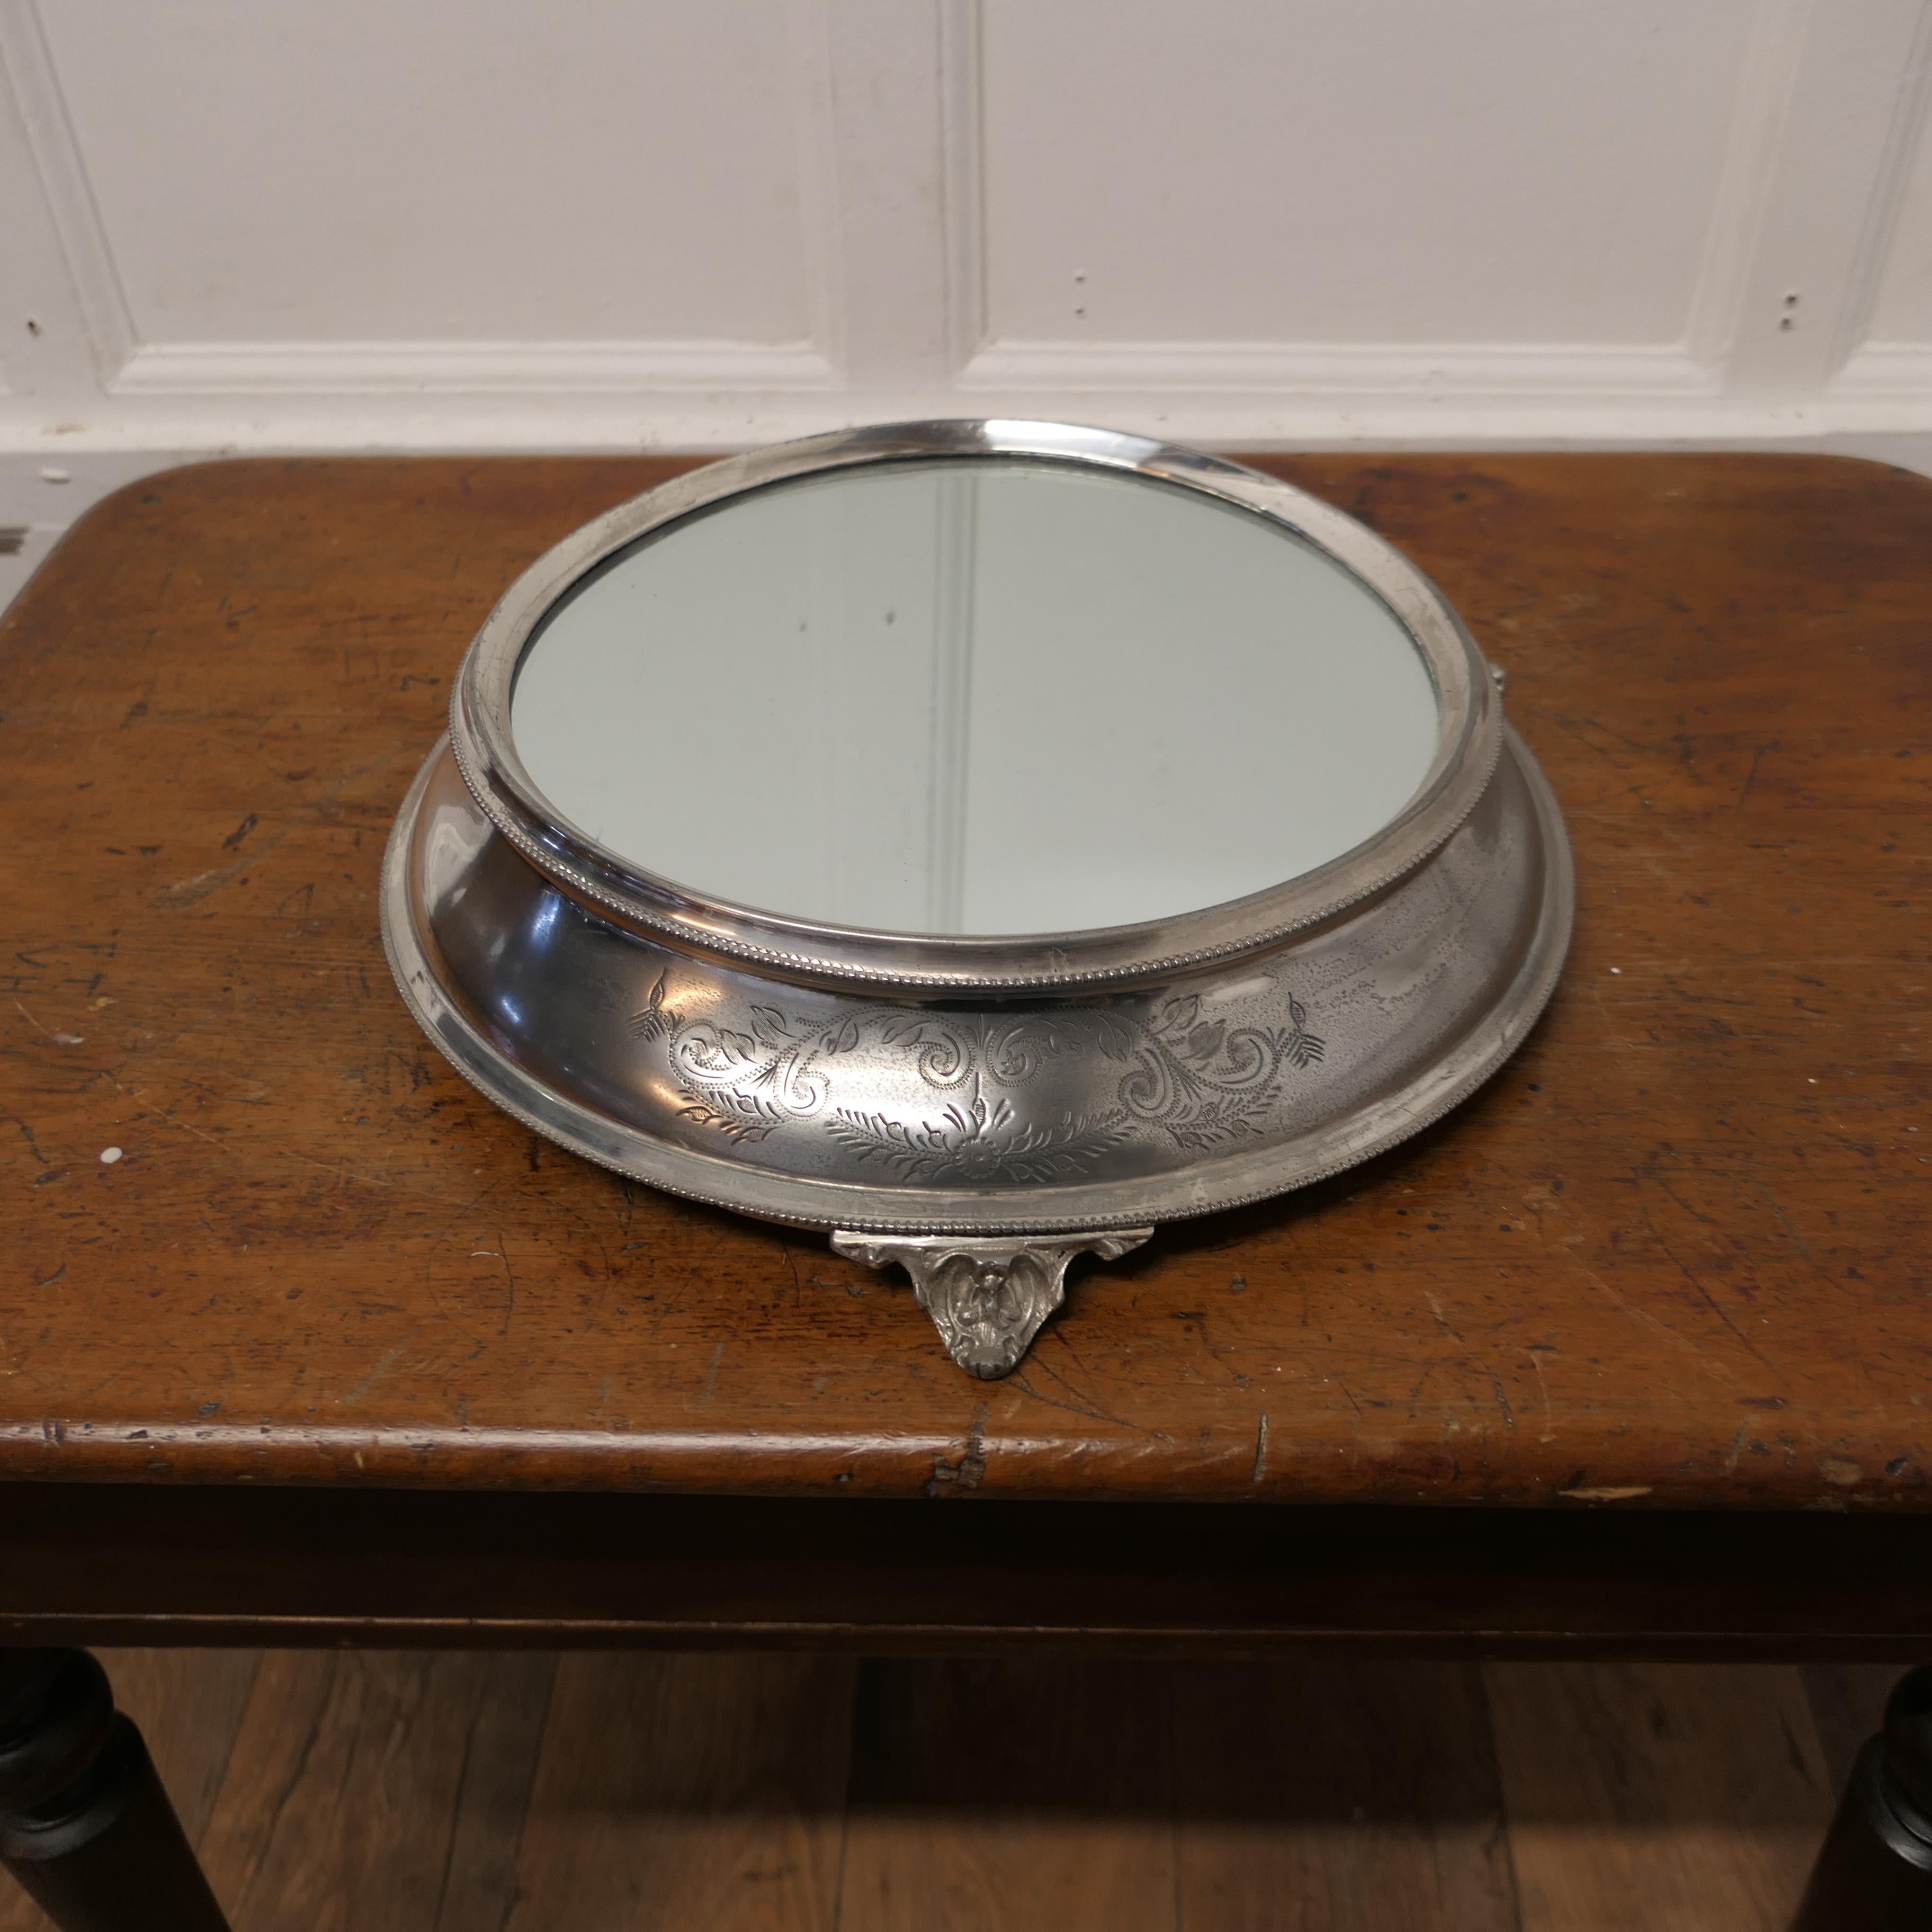 Large Vintage Mirror Top Silver Plate Christmas Cake Stand

This is a beautiful piece, the stand is 4” high with a mirror top plate
The Stand has a wide etched shaped side with feet beneath, and will take a cake up to 12” across, the diameter of the